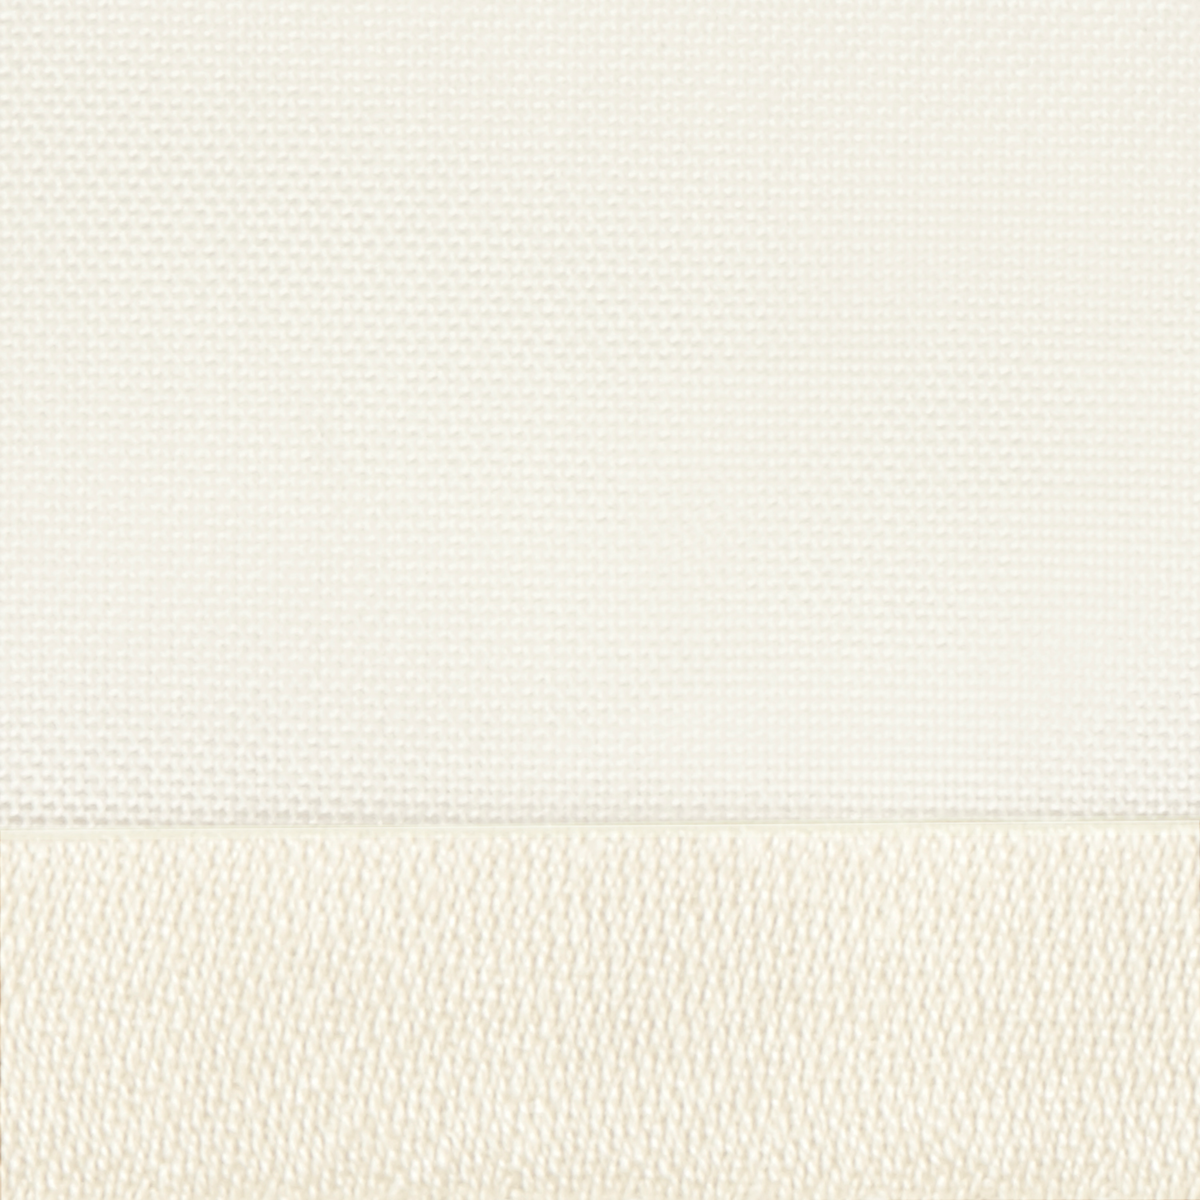 Swatch Sample of Matouk Gatsby Bedding Collection Ivory/Ivory Color